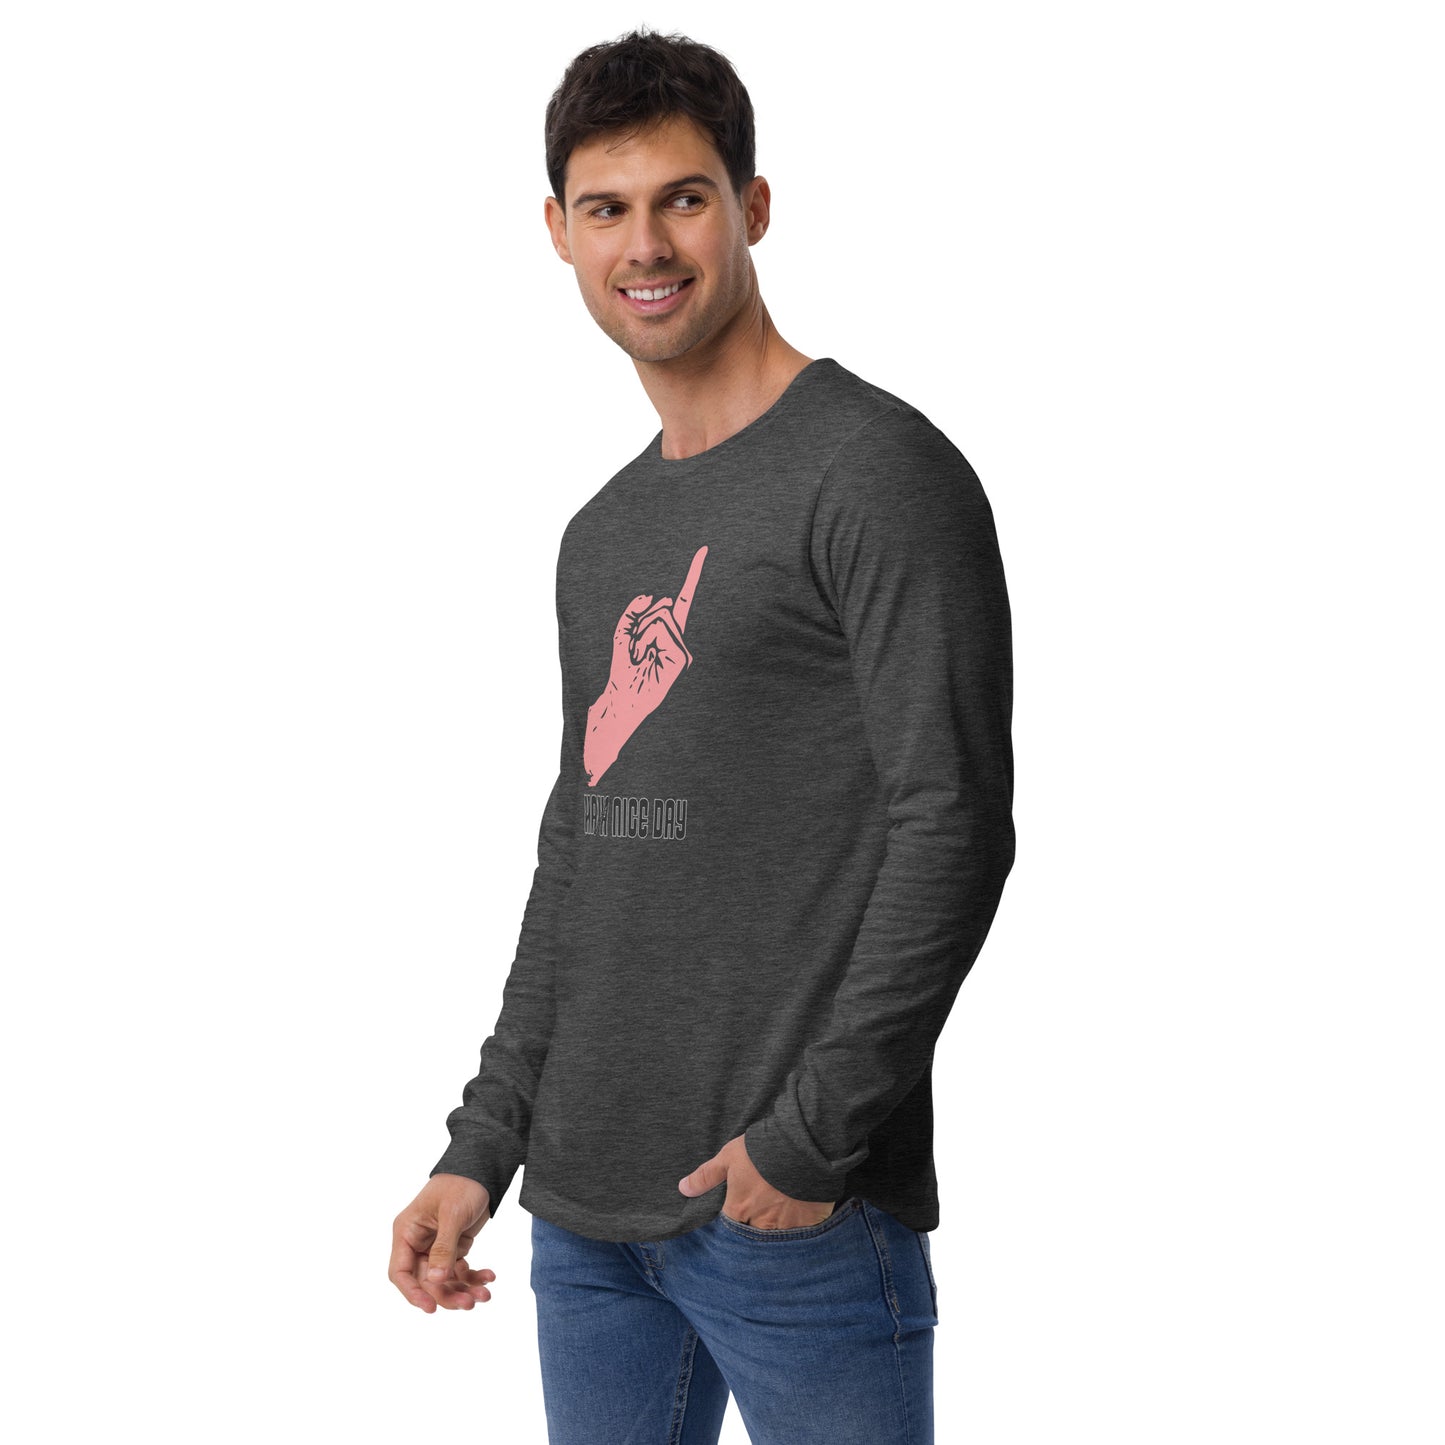 Have a Nice Day Unisex Long Sleeve Shirt